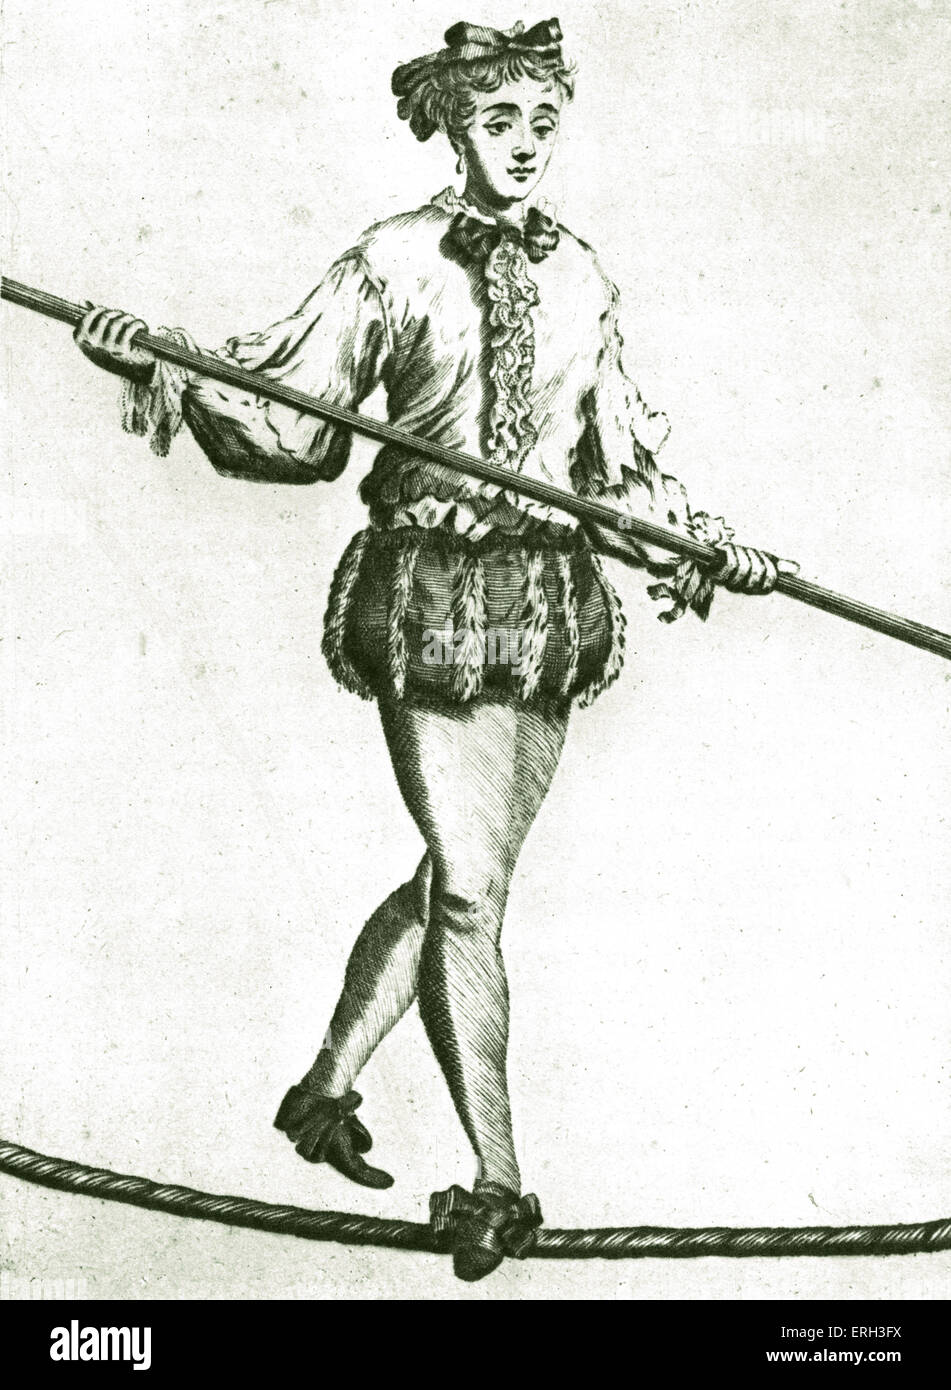 A famous tight rope walker of the seventeenth century. Stock Photo